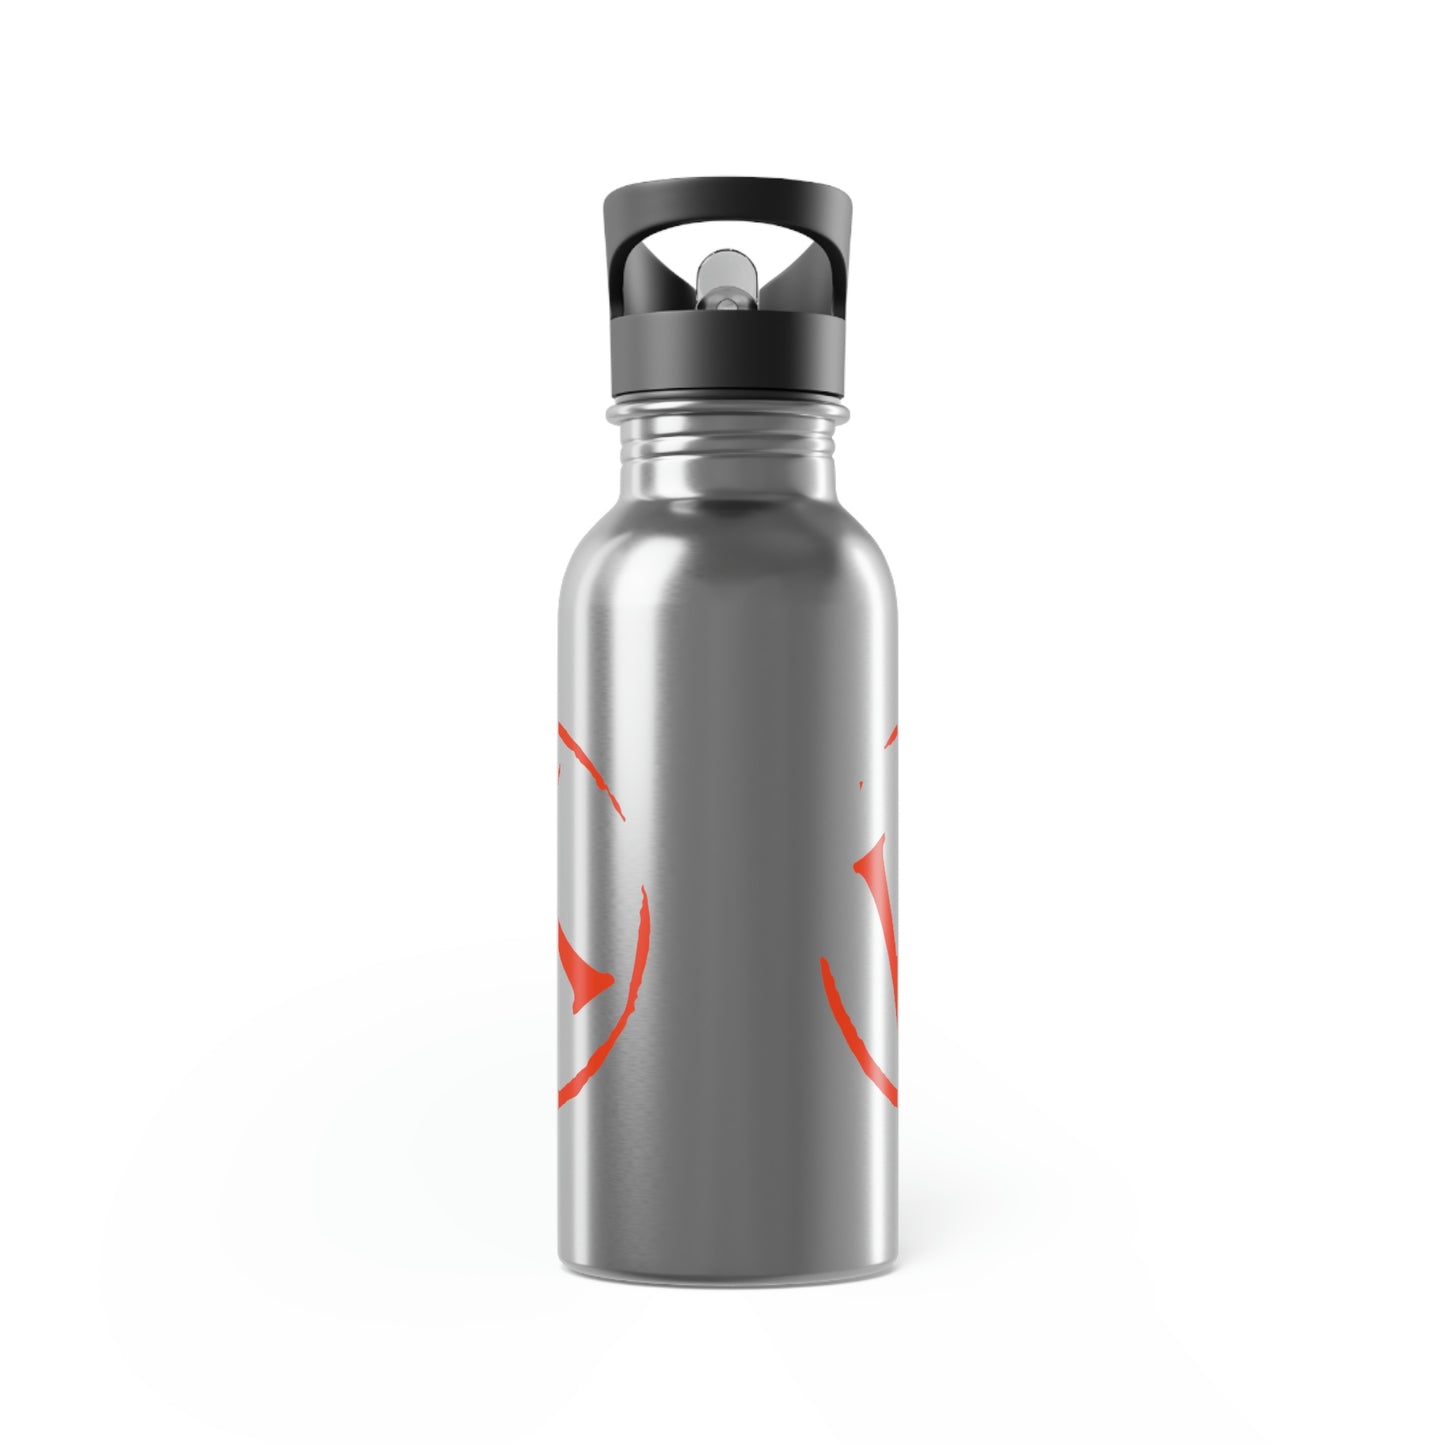 Branded K Stainless Steel Water Bottle With Straw, 20oz Oval logo #H15-03E